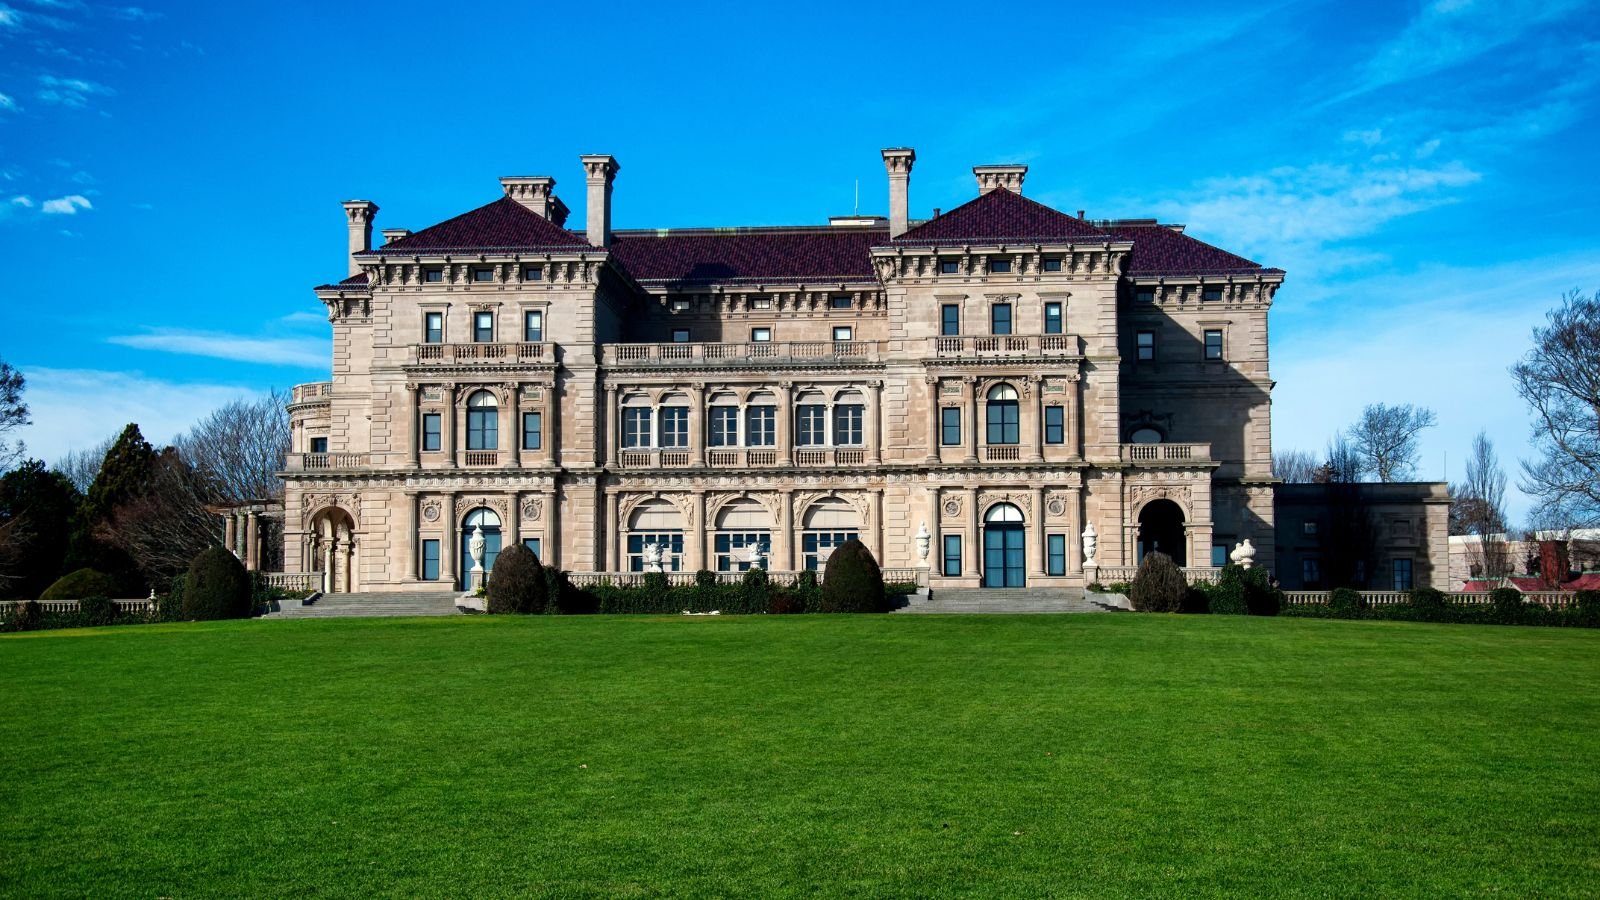 <p>The Breakers is a grand mansion and a popular tourist attraction. Entrance fees can be around<a href="https://www.newportmansions.org/tickets/" rel="noopener"> $30 for adults</a>. While not the most expensive on this list, some reviewers felt the price wasn’t justified for a self-guided tour. Plus, the crowd can be an issue.</p>